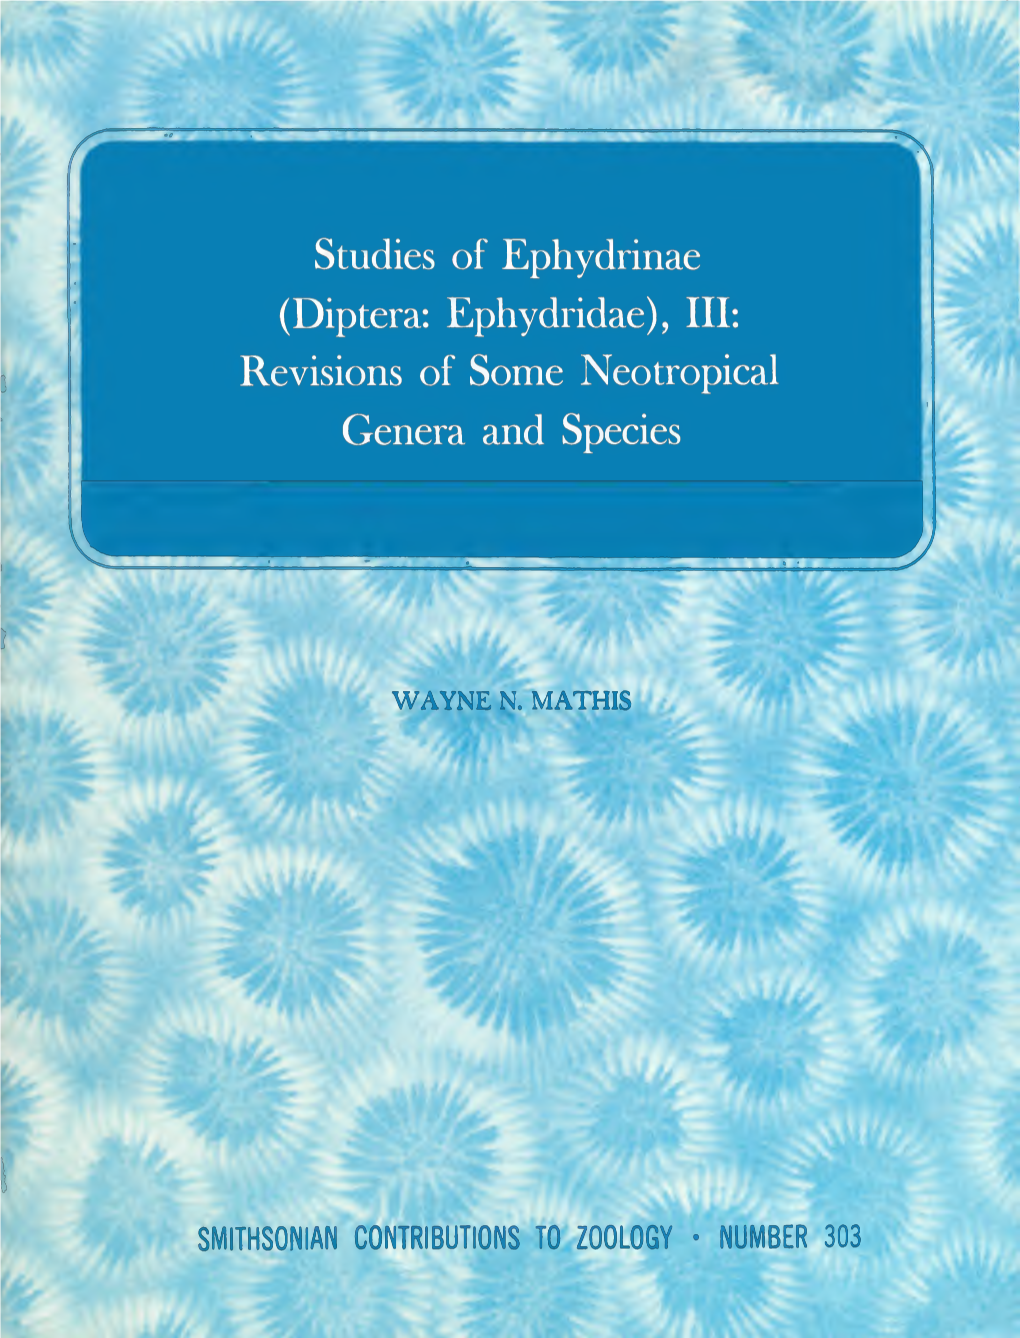 Studies of Ephydrinae (Diptera: Ephydridae), III: Revisions of Some Neotropical Genera and Species